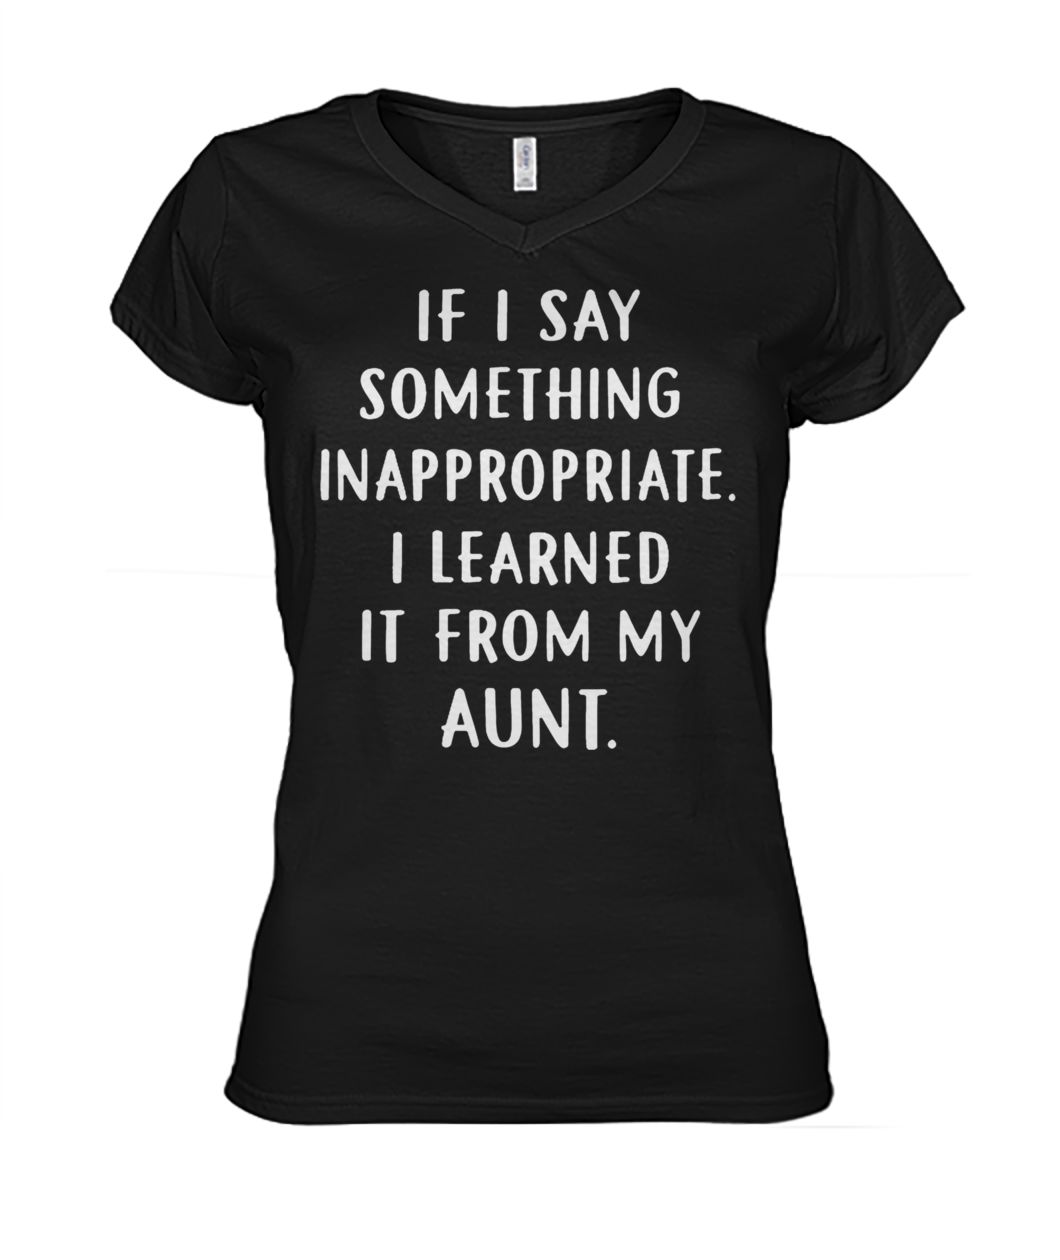 If my kids say something inappropriate they learned it from my aunt women's v-neck